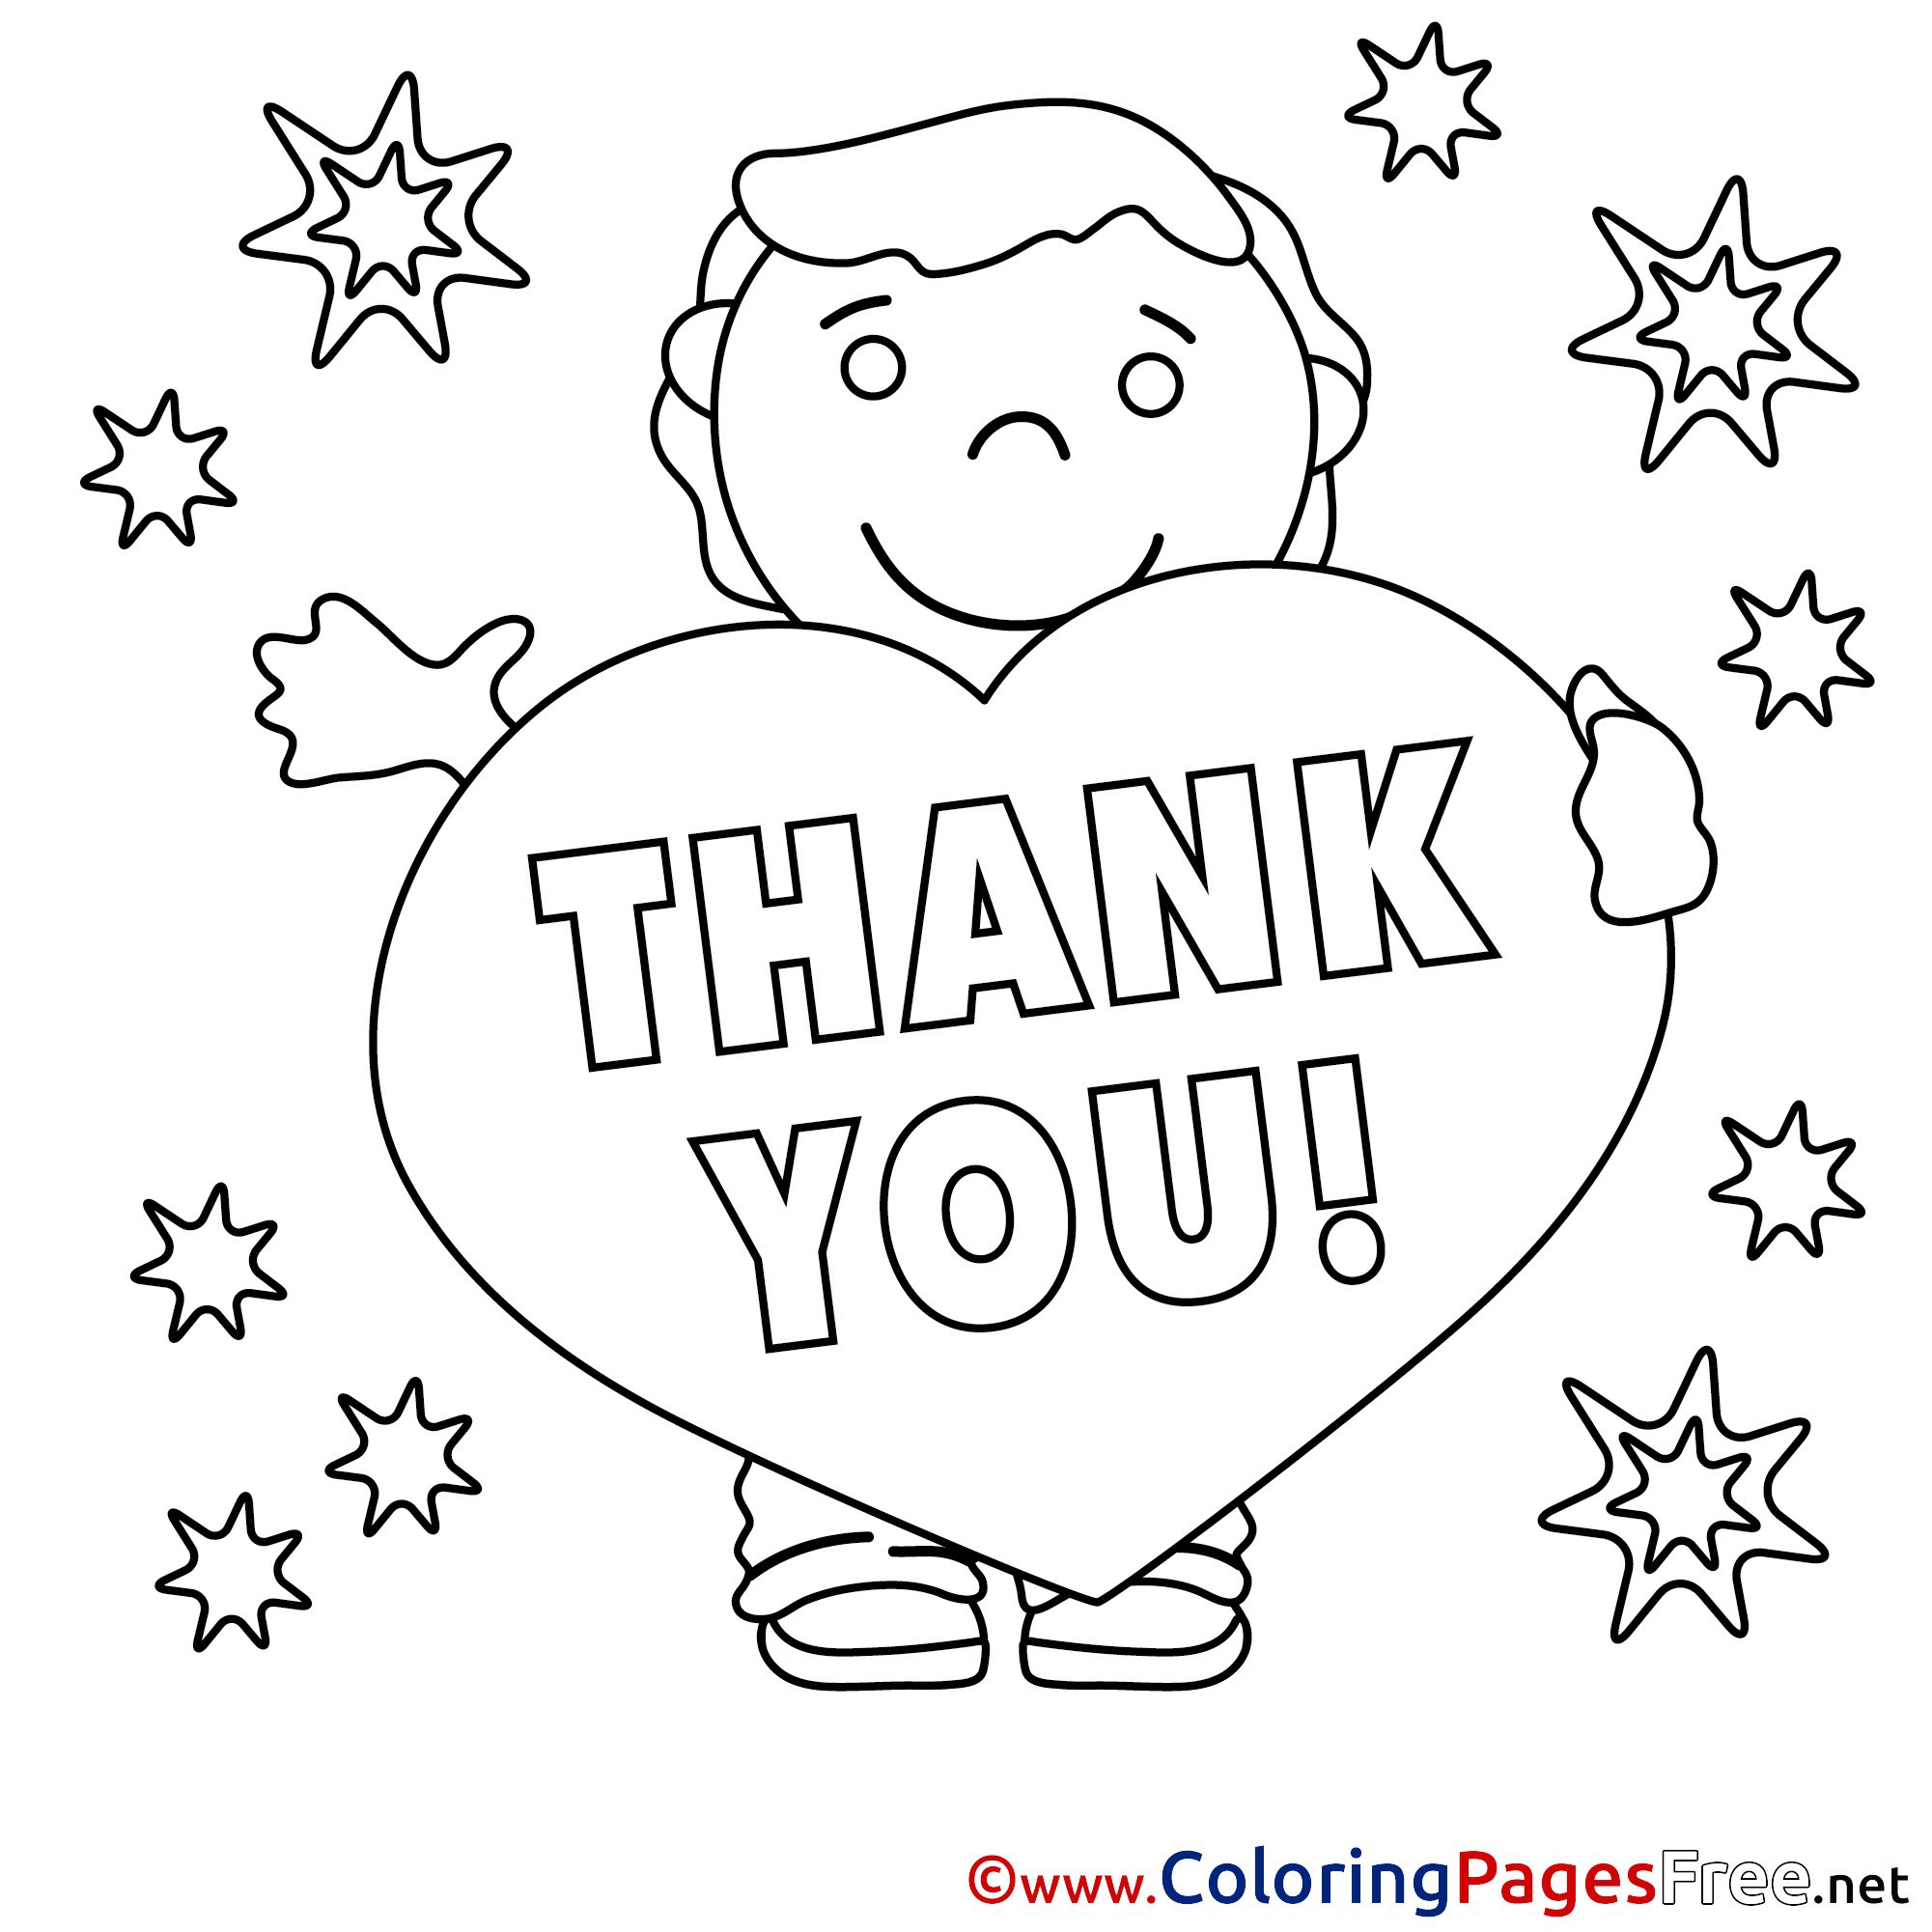 Please And Thank You Coloring Pages at GetColorings.com | Free printable colorings pages to